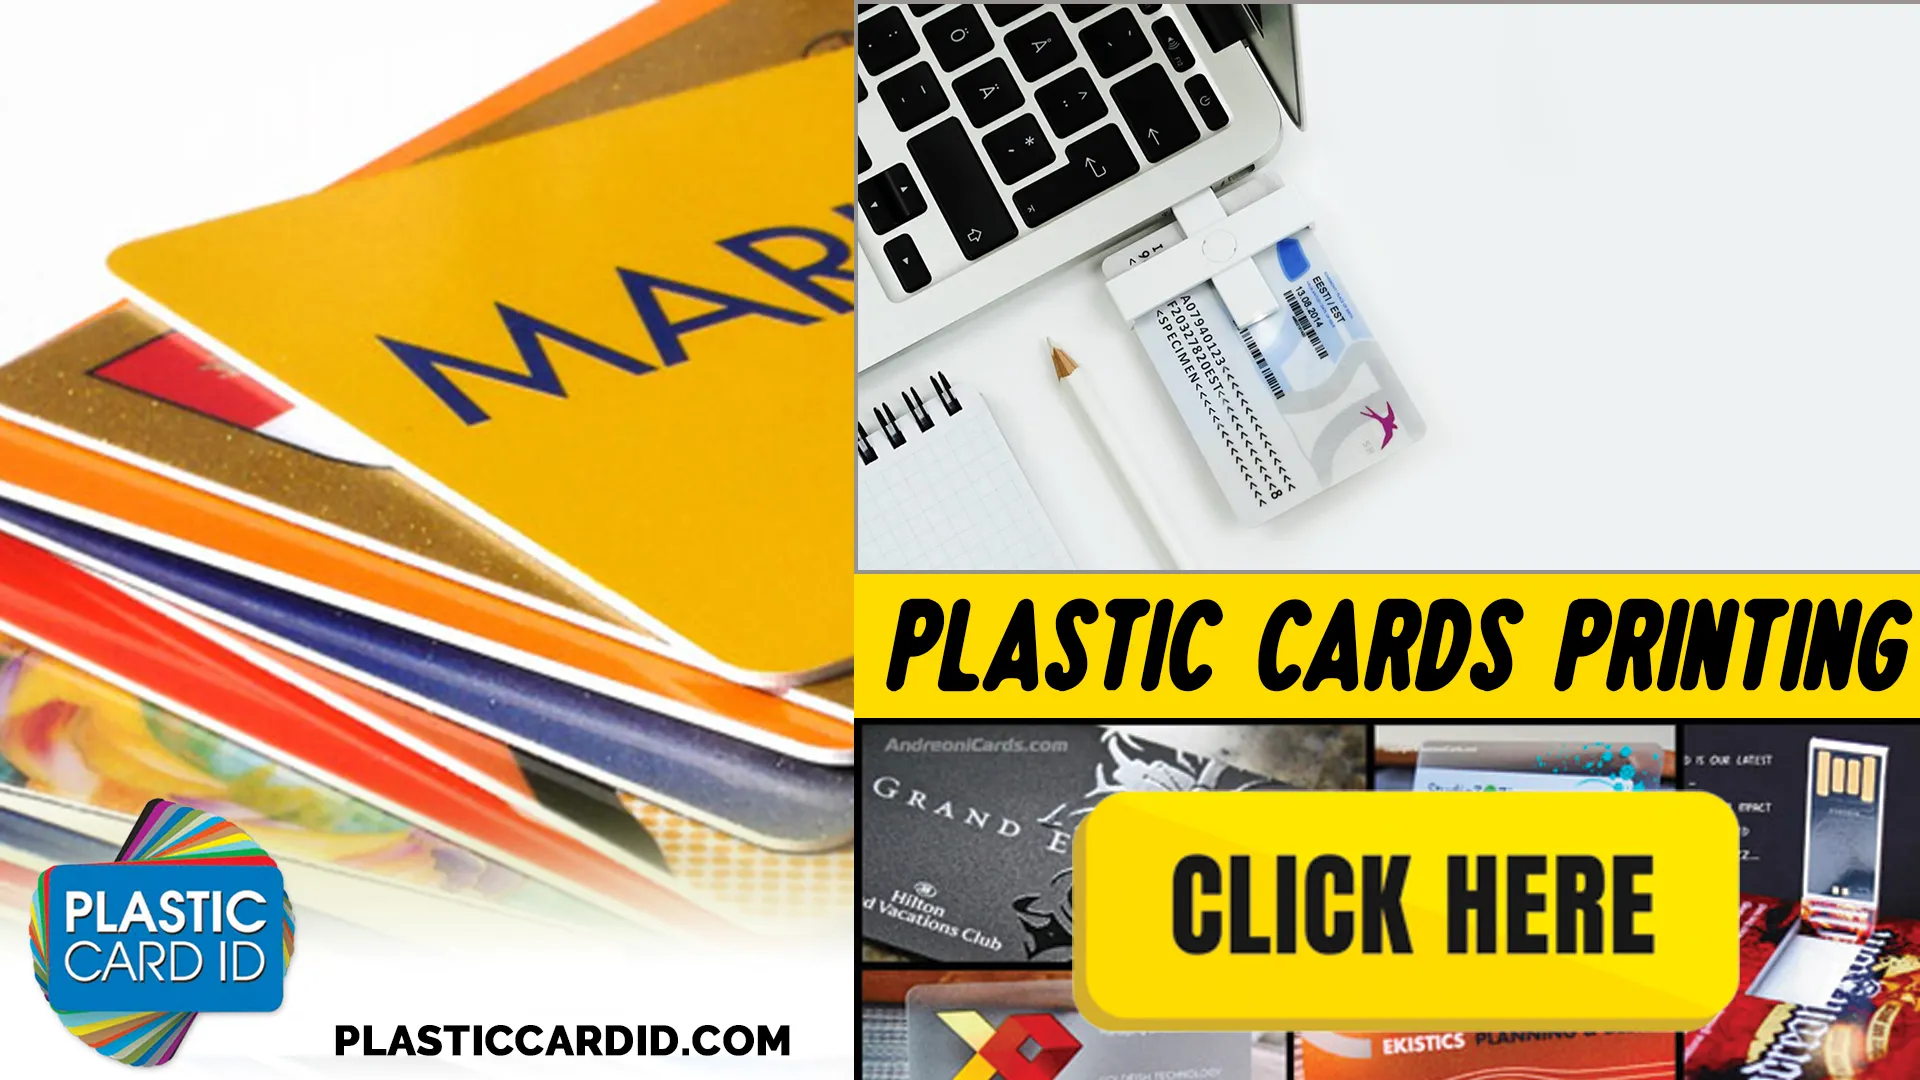 Security First  Plastic Card ID
's Unyielding Commitment